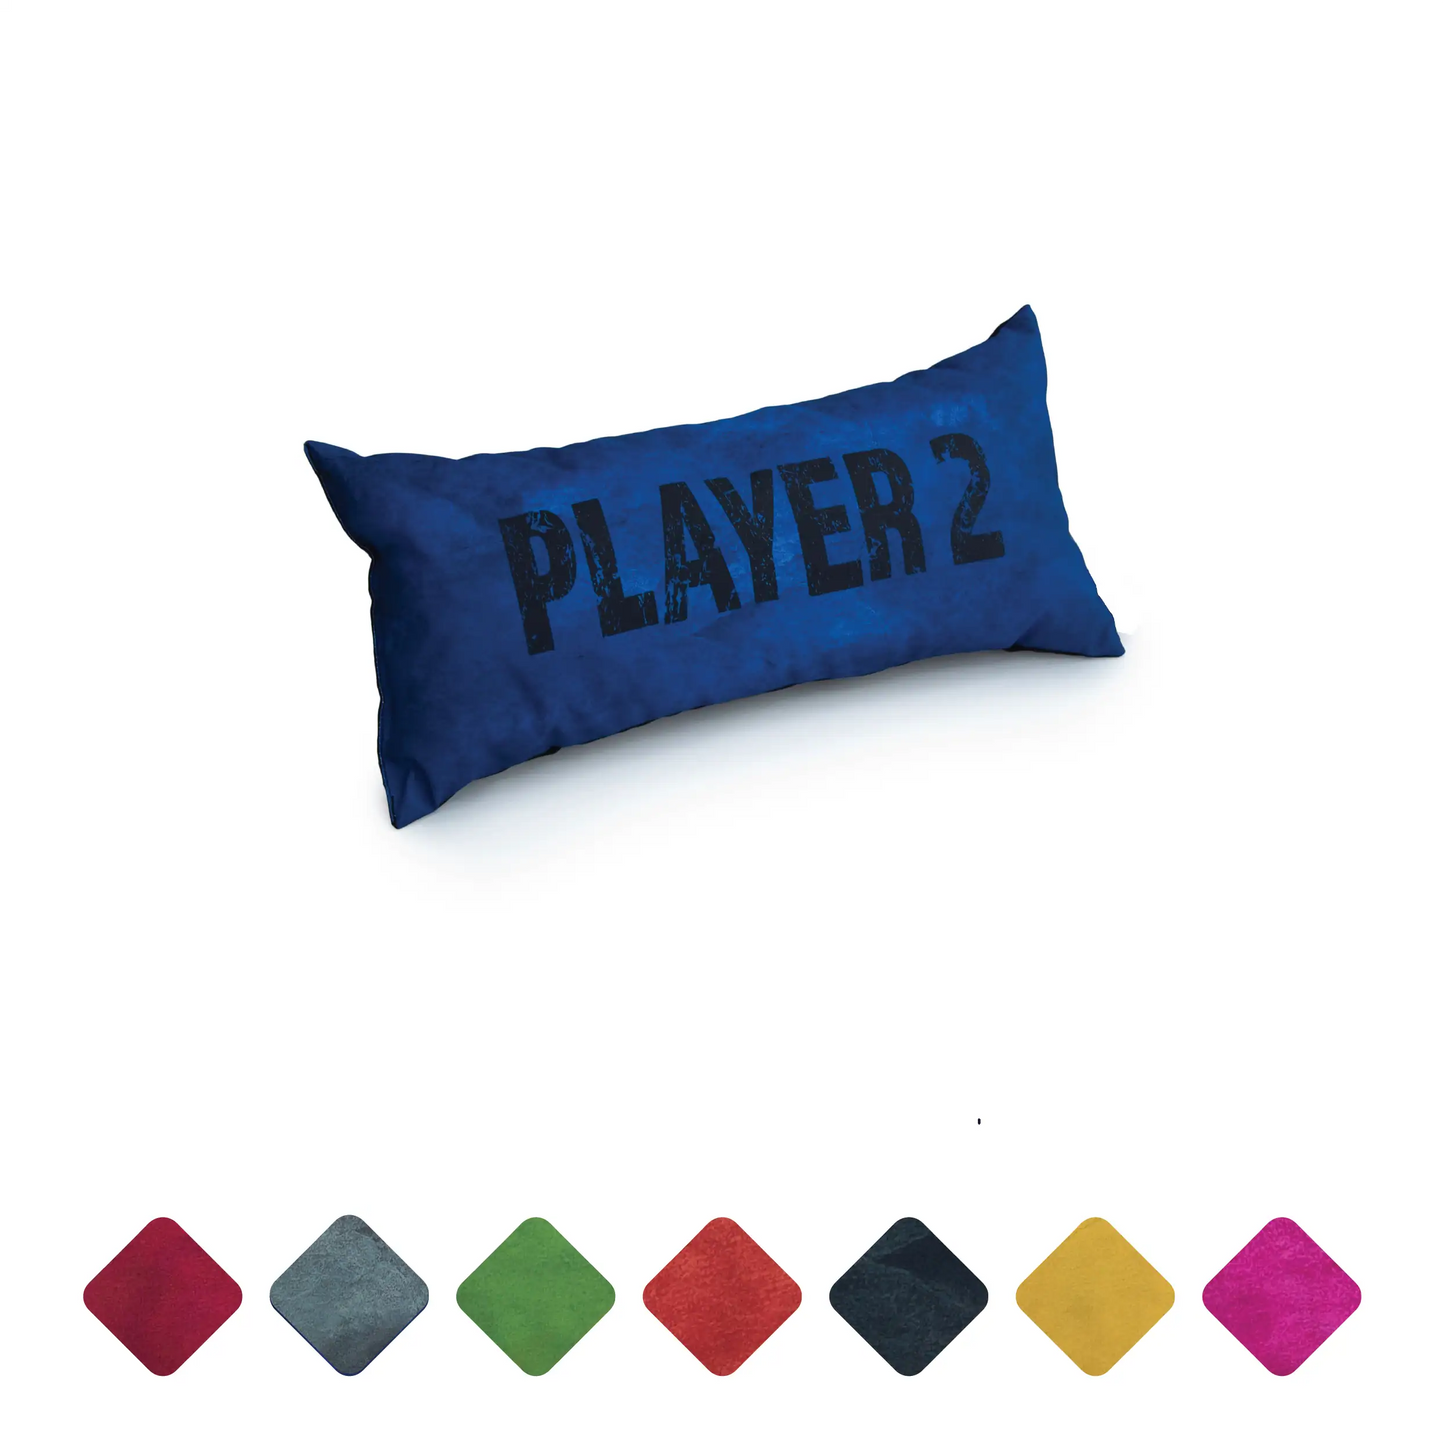 A blue pillow with the words "player 2" written on it.